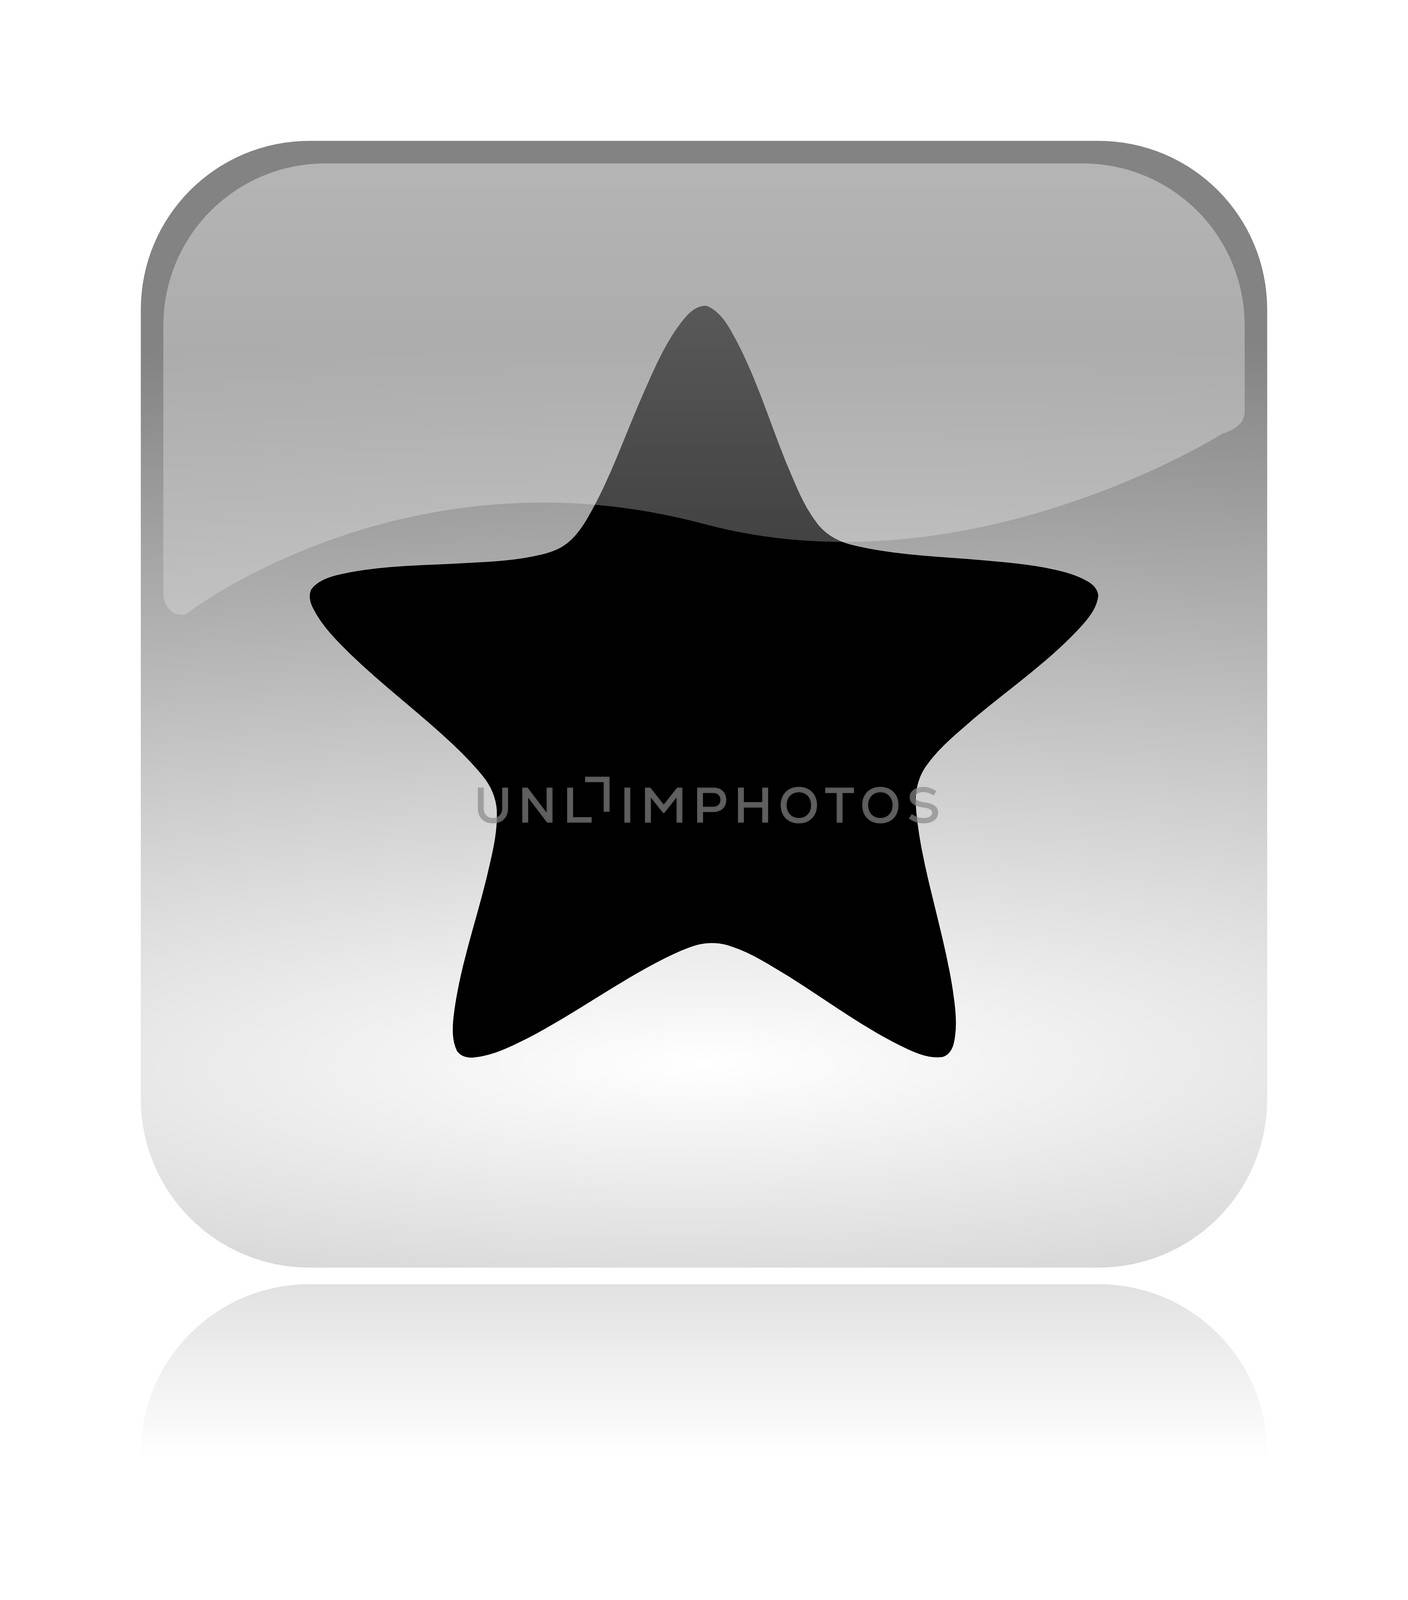 Star App Rounded Square Icon with Reflection Illustration Isolated on White Background